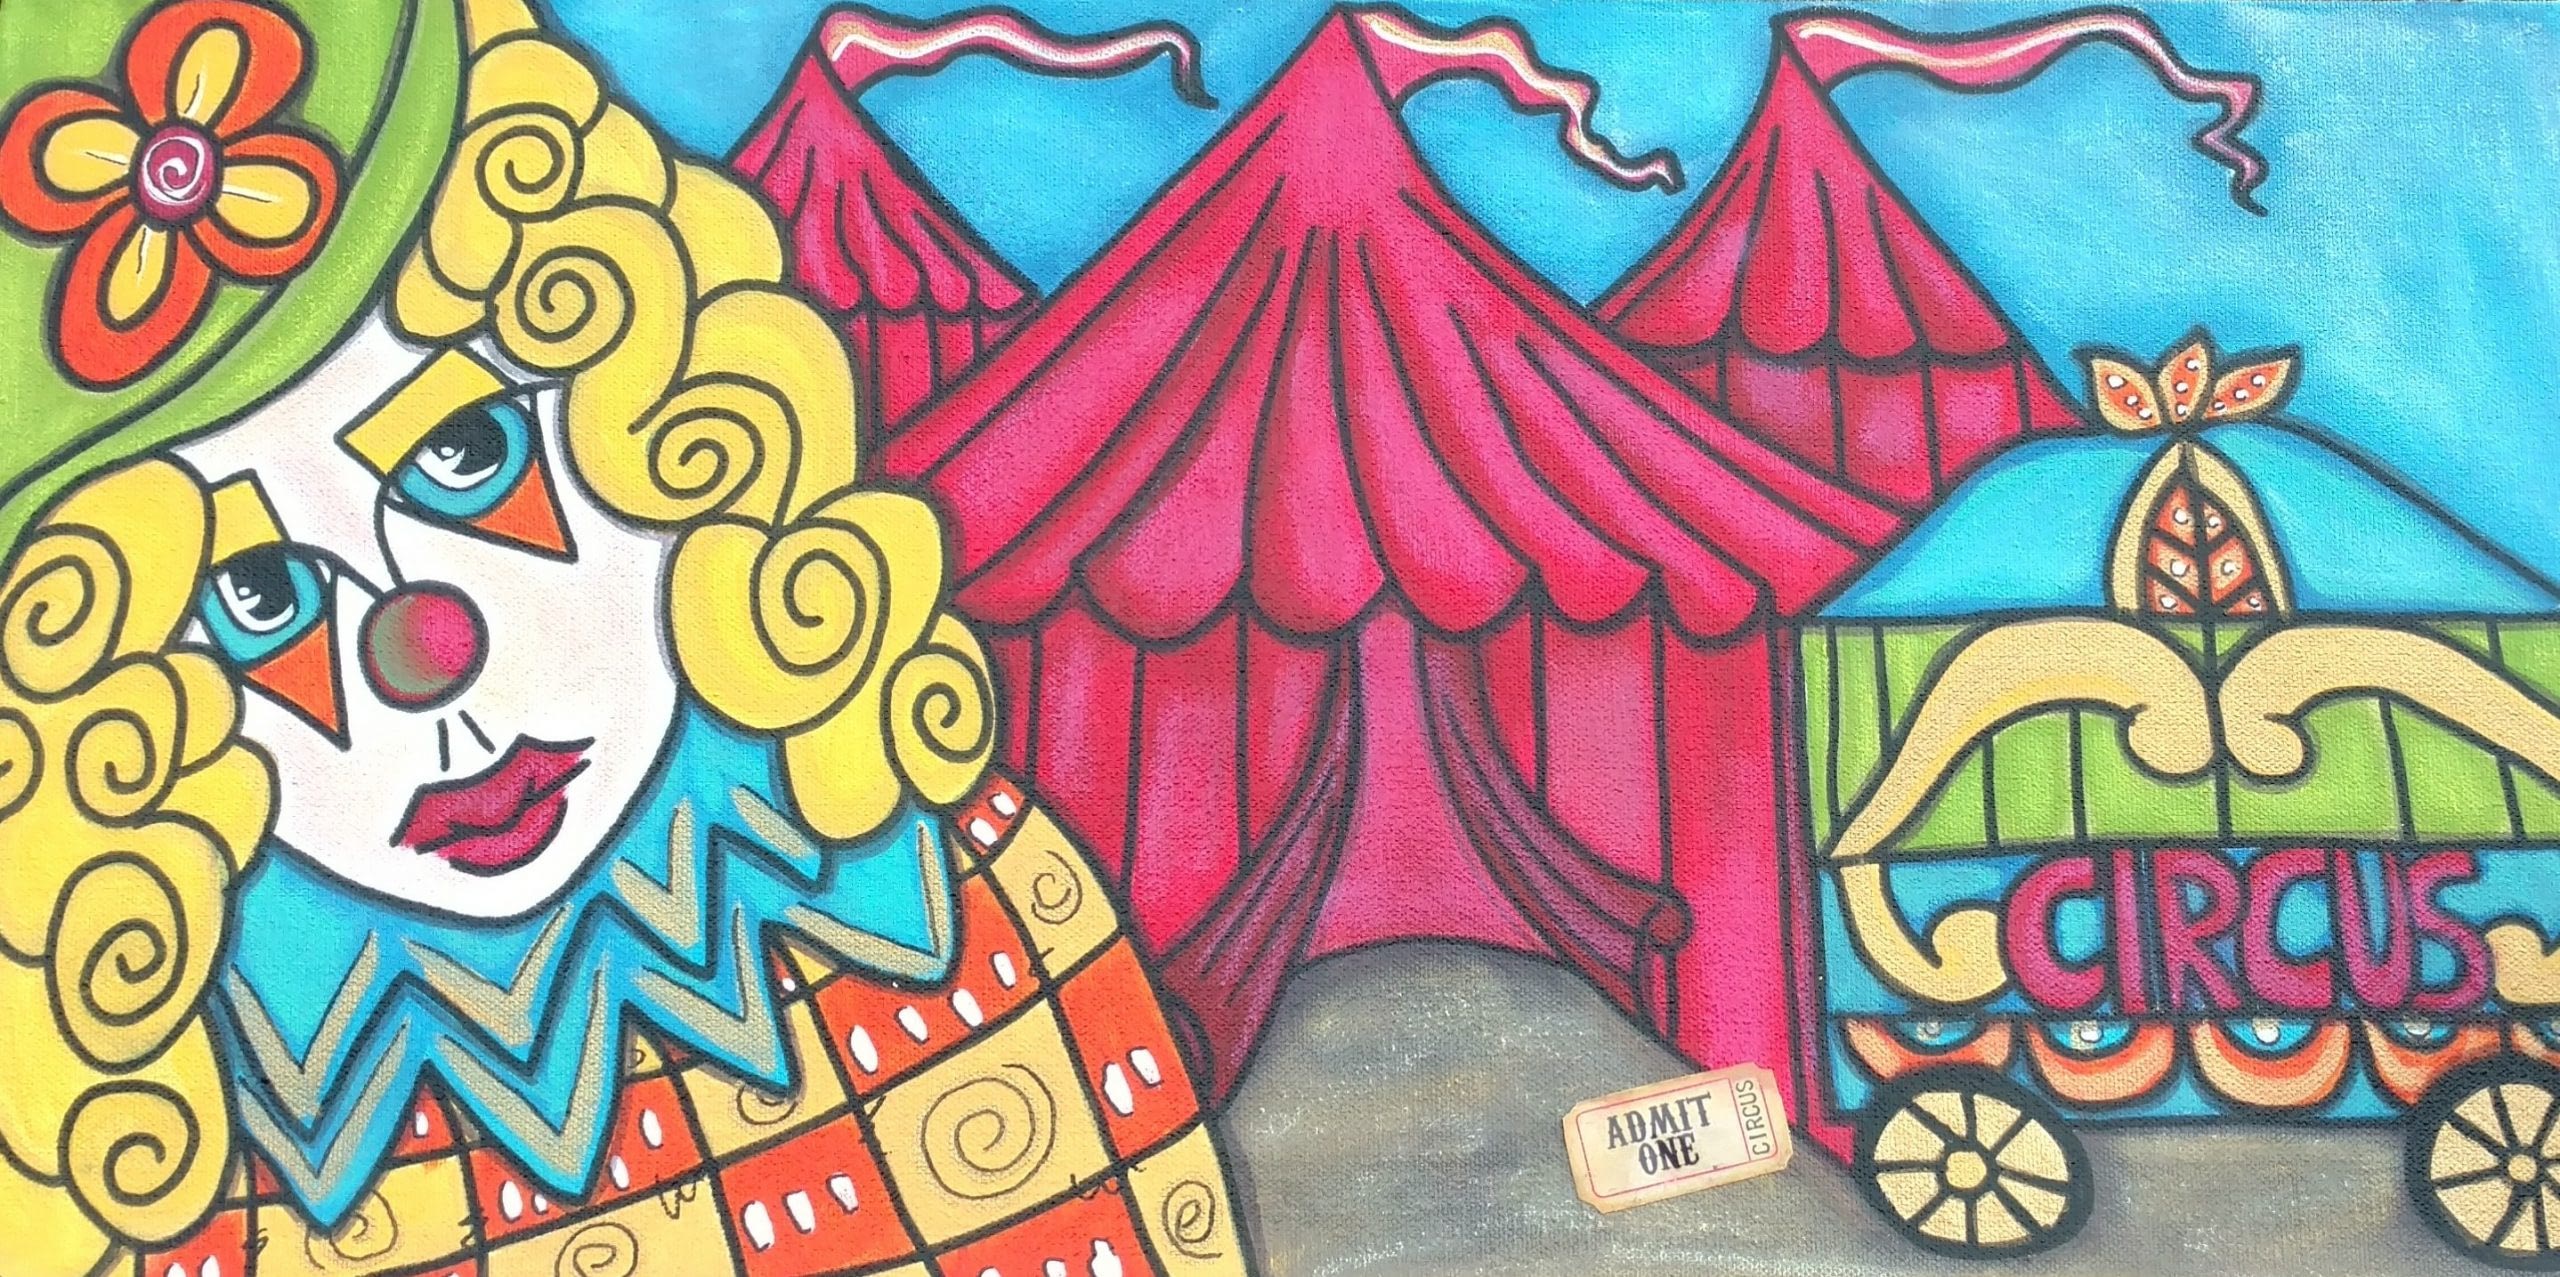 a clown with yellow hair and green hat infron of a circus tent and wagon